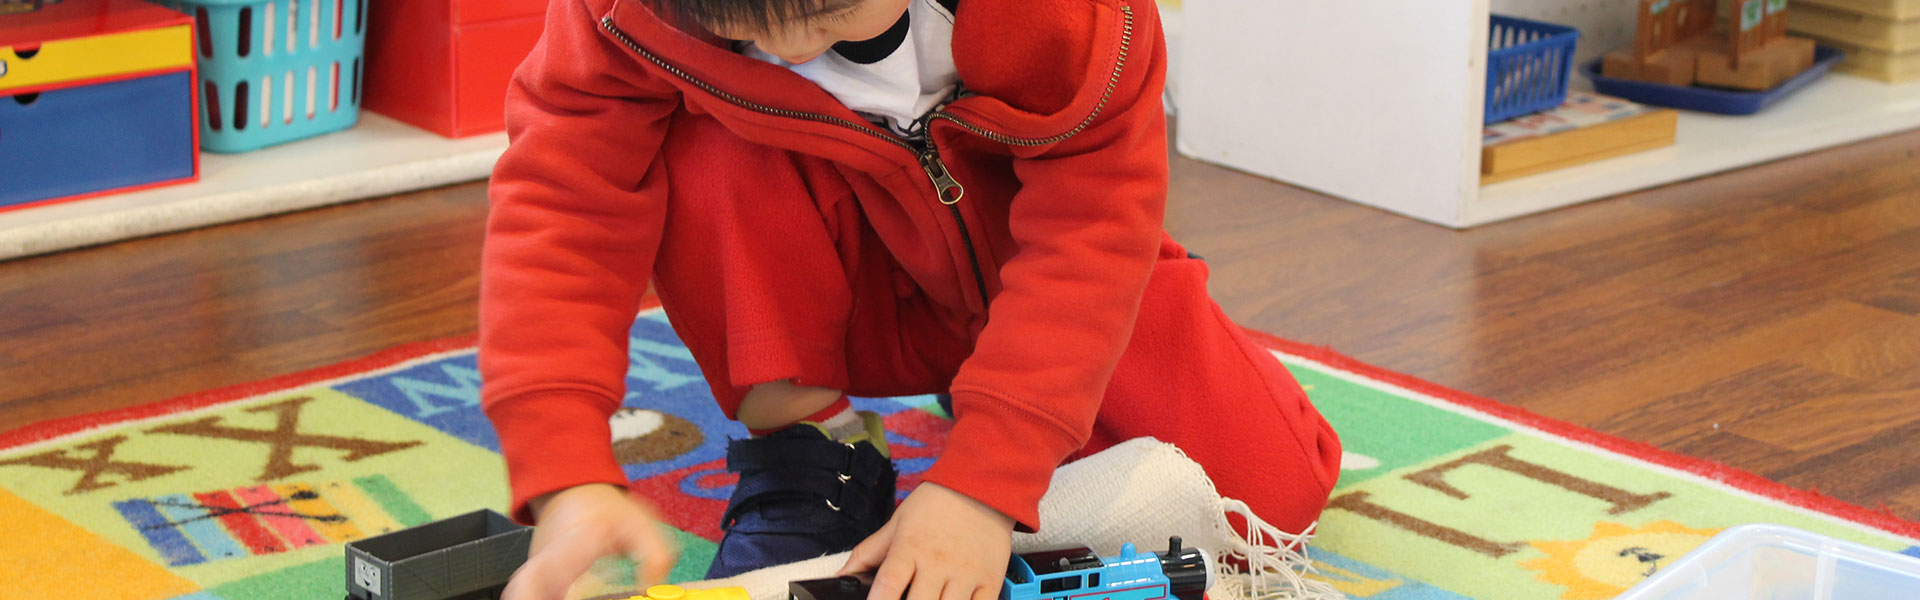 Montessori child playing with STEM products